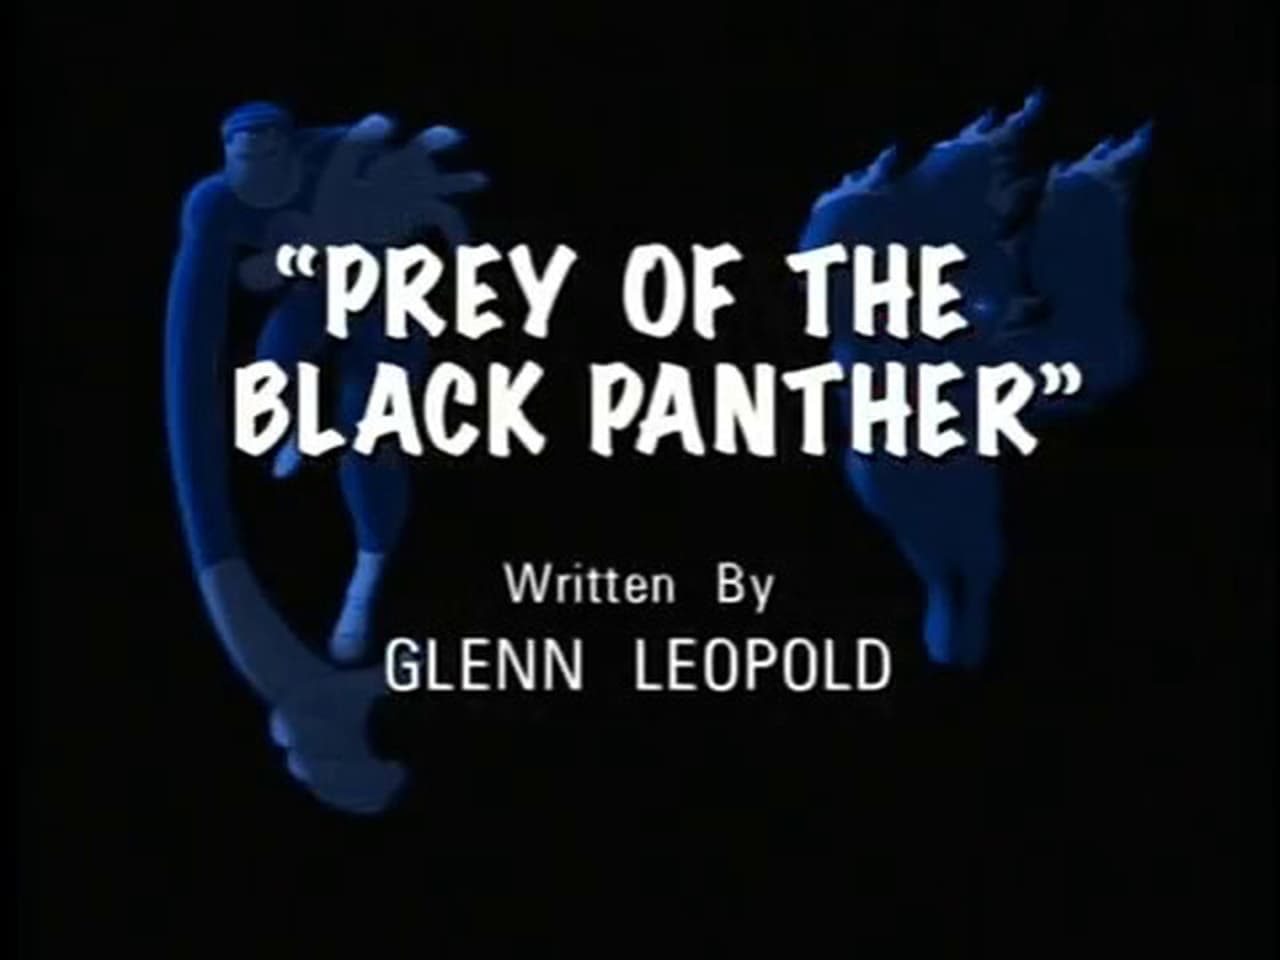 Prey of the Black Panther